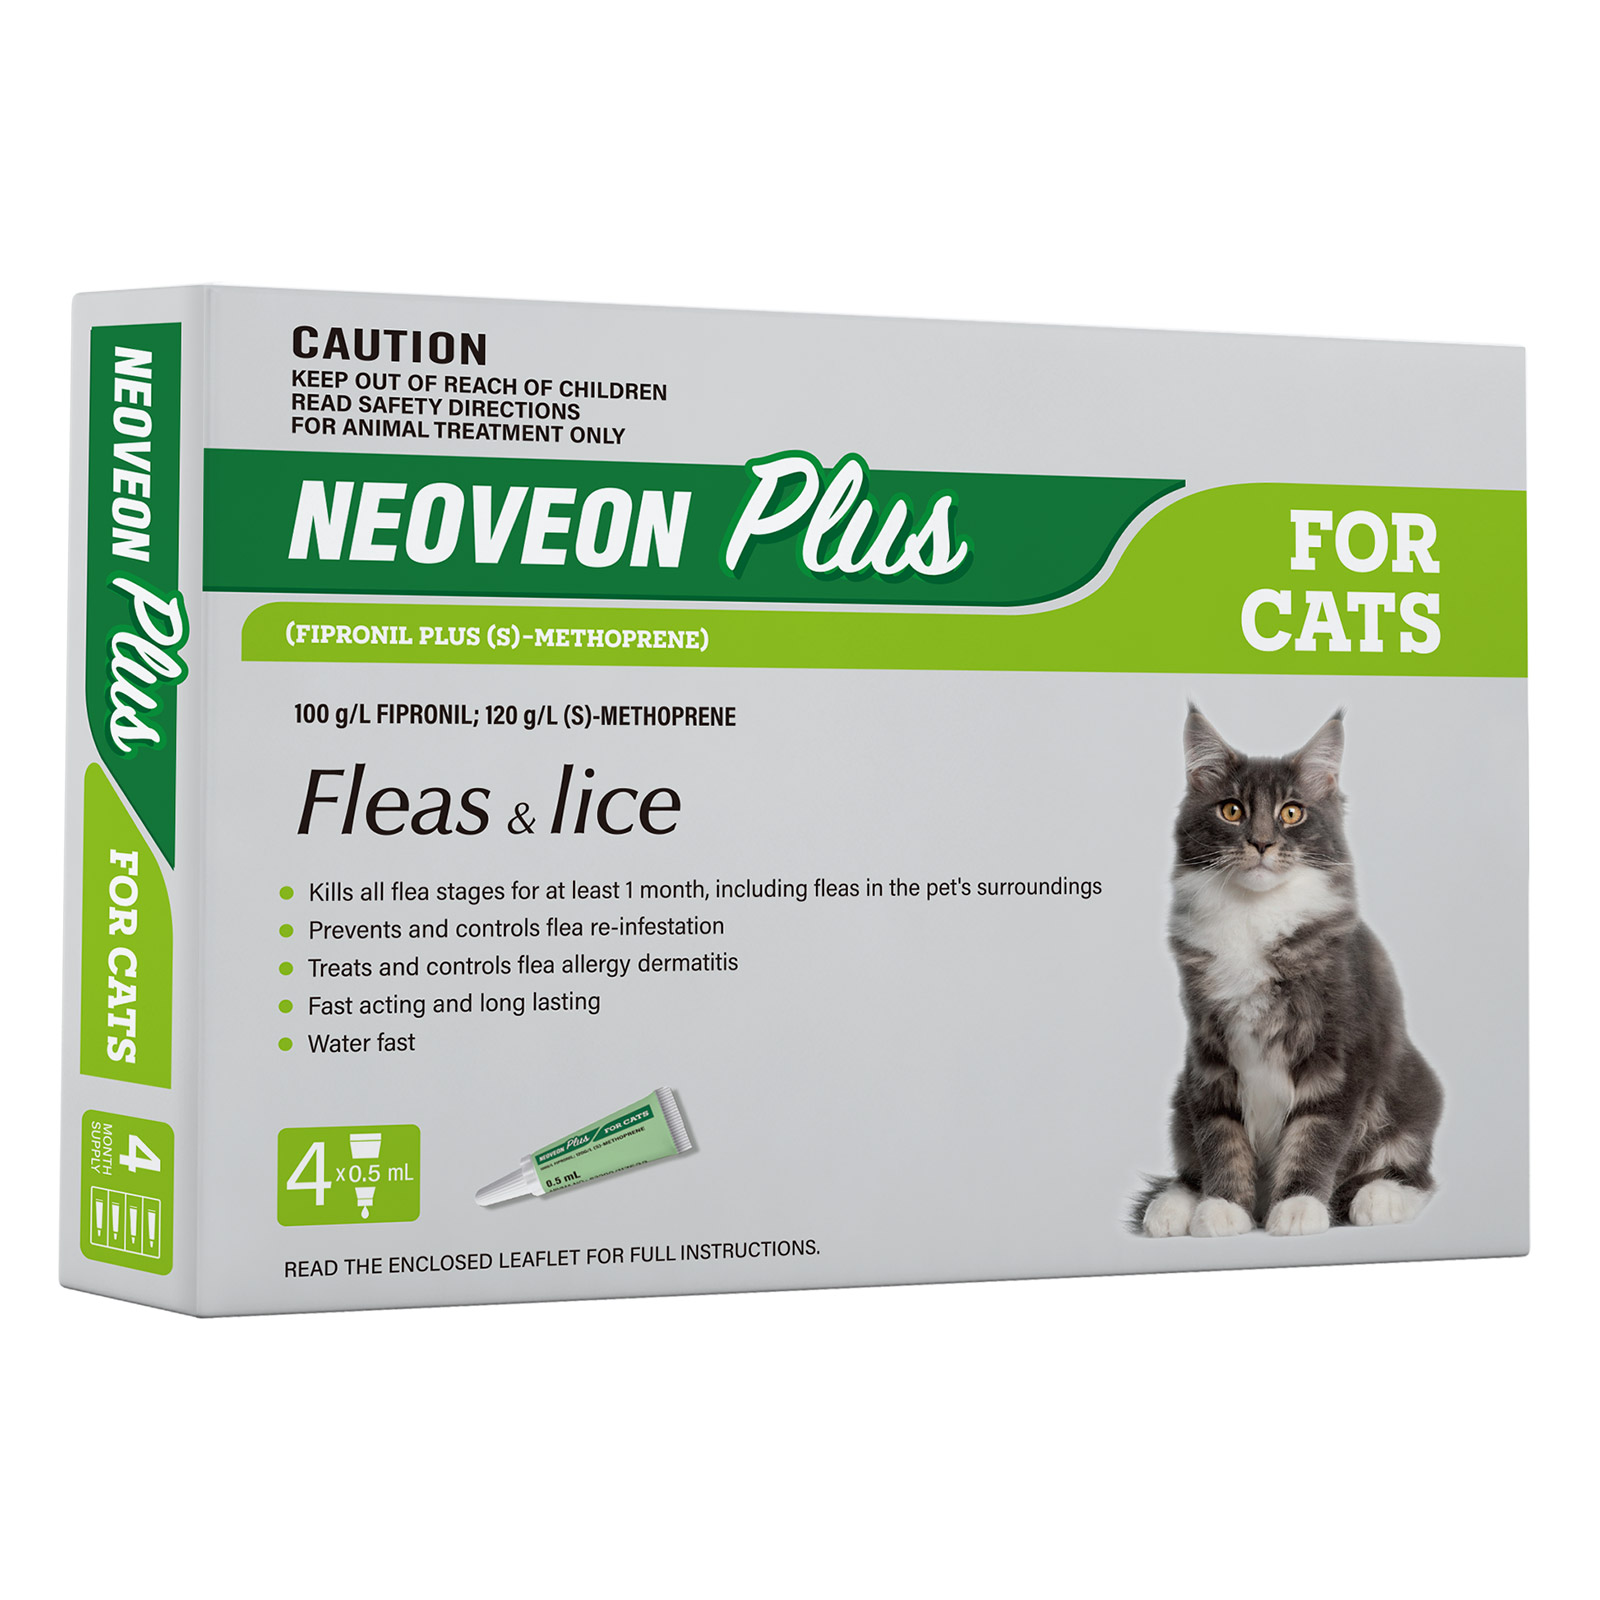 Buy Neoveon Plus Flea and Lice for Cats Online at DiscountPetCare.com.au